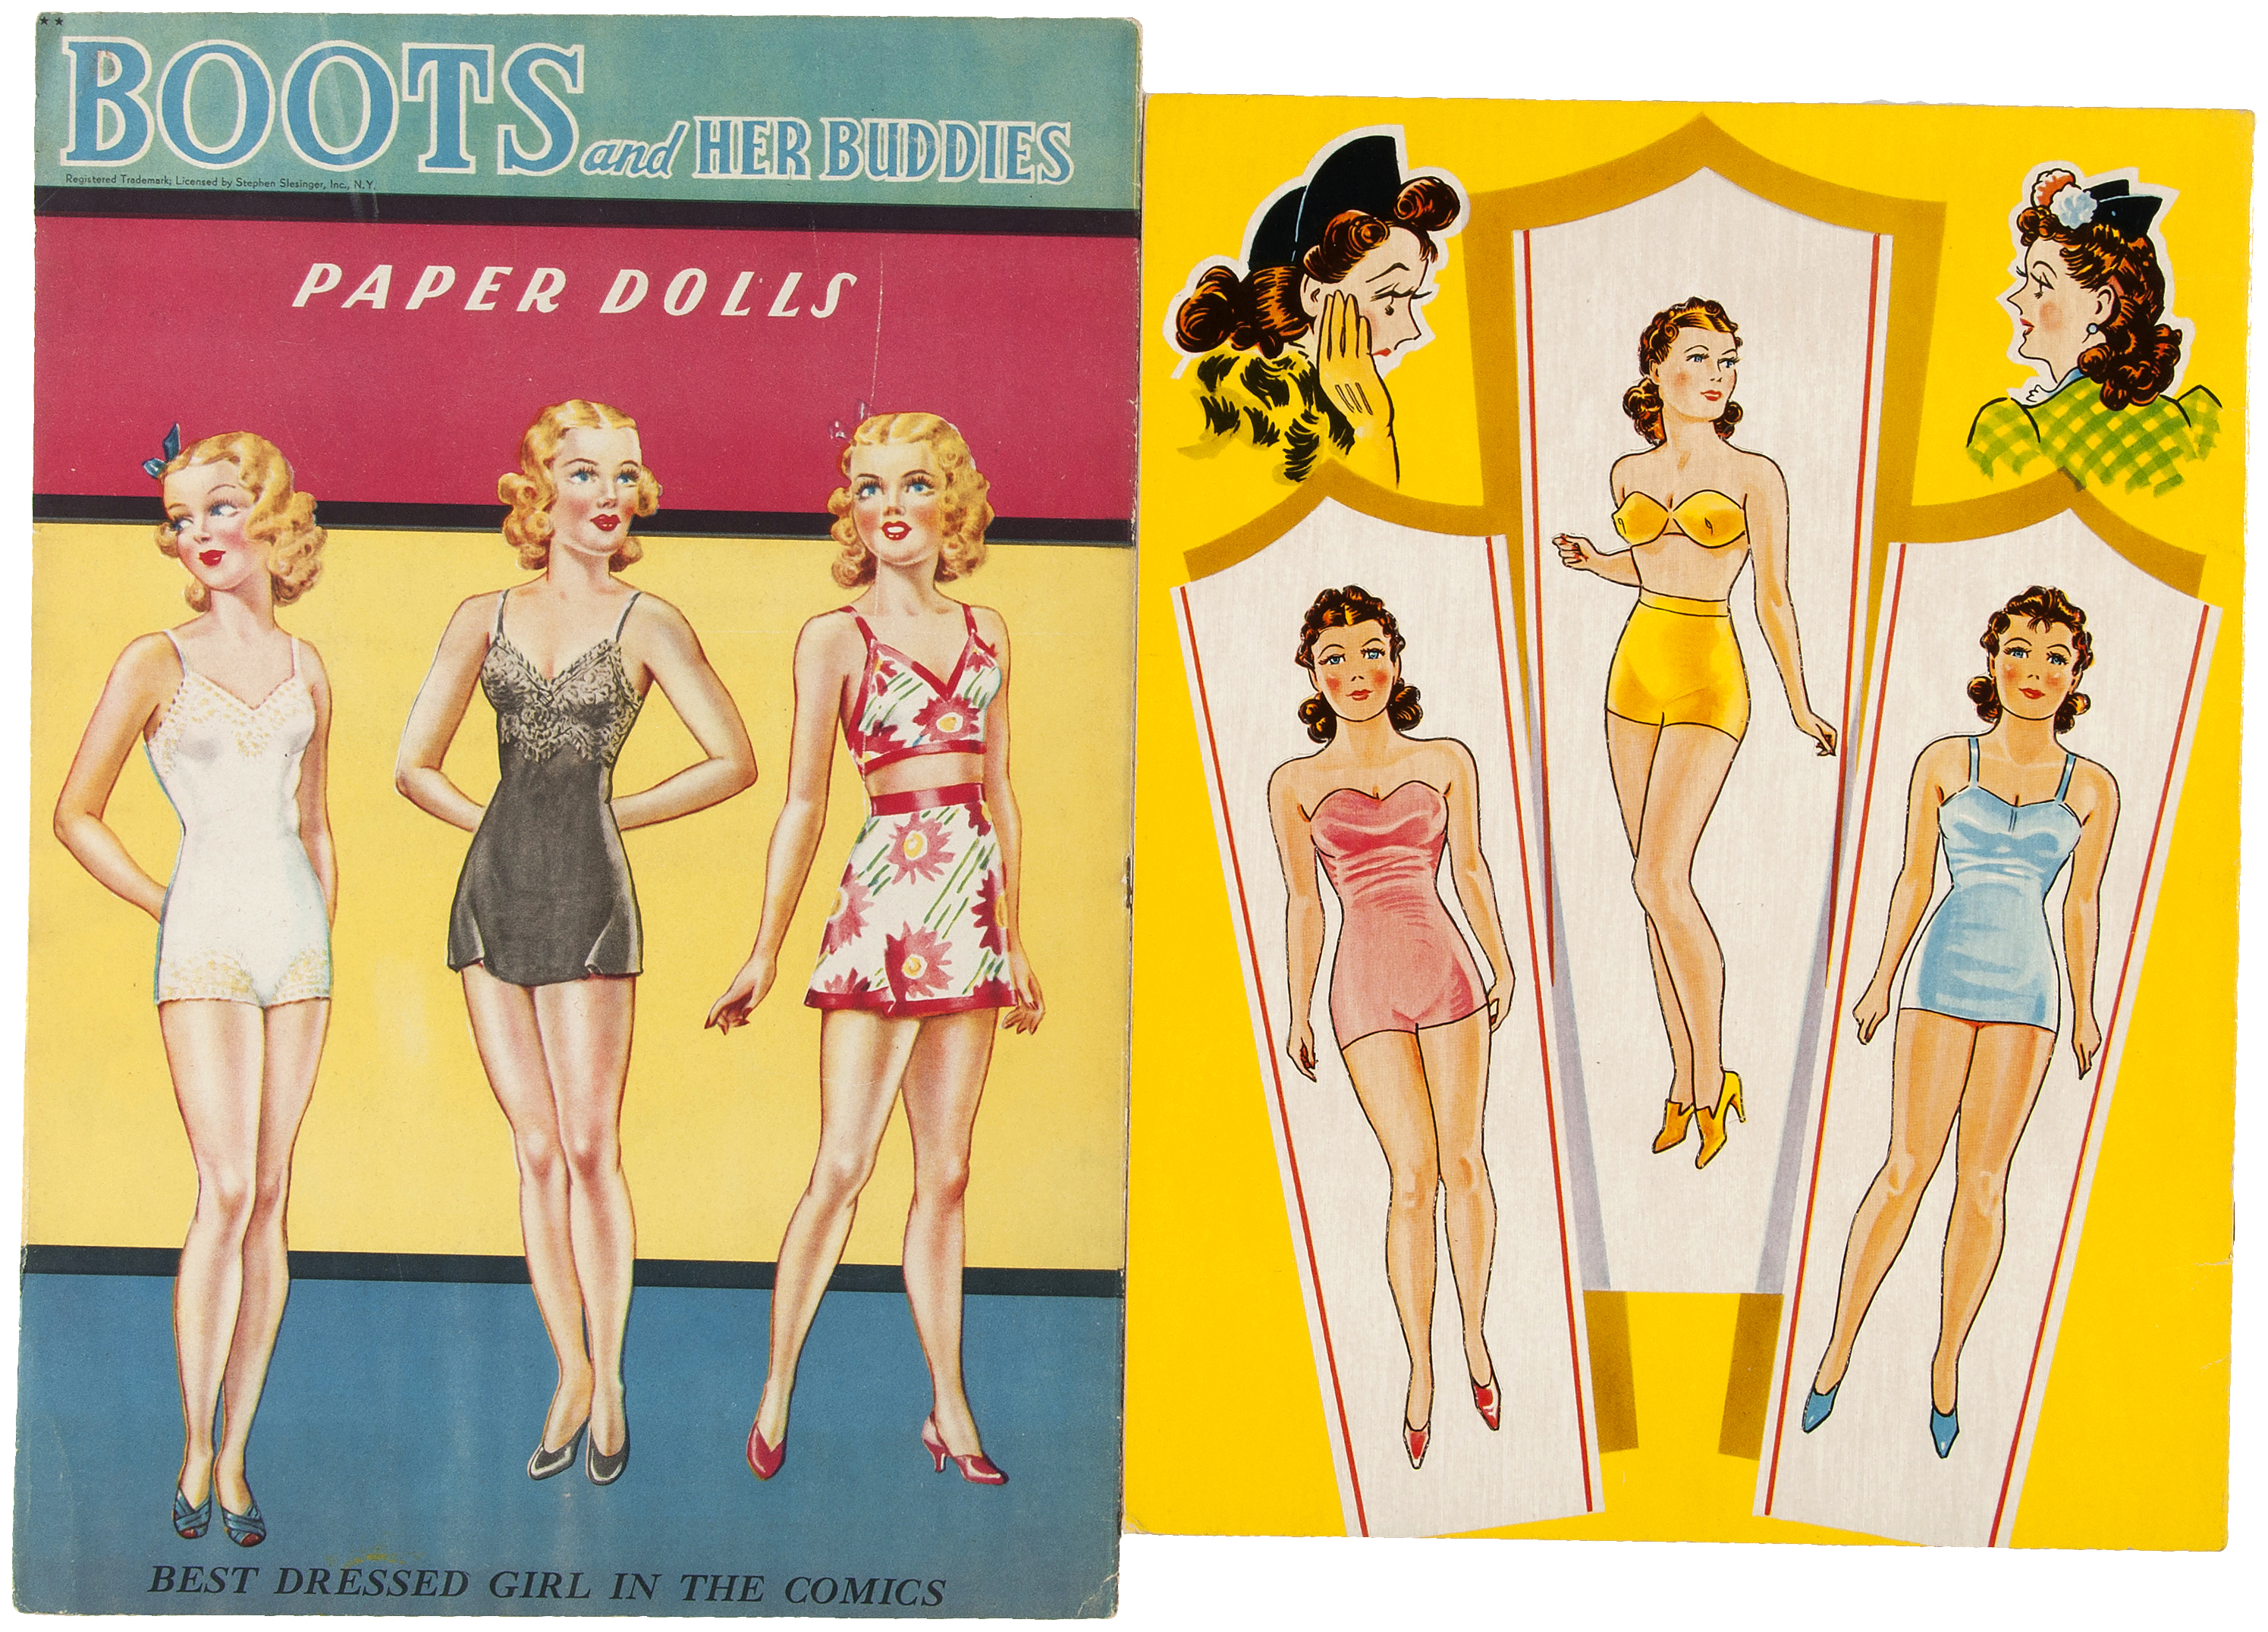 VINTAGE 1950S FRITZI RITZ PAPER DOLL LASER REPRODUCTION~UNCUT LO PRICE NO.1 SELL 